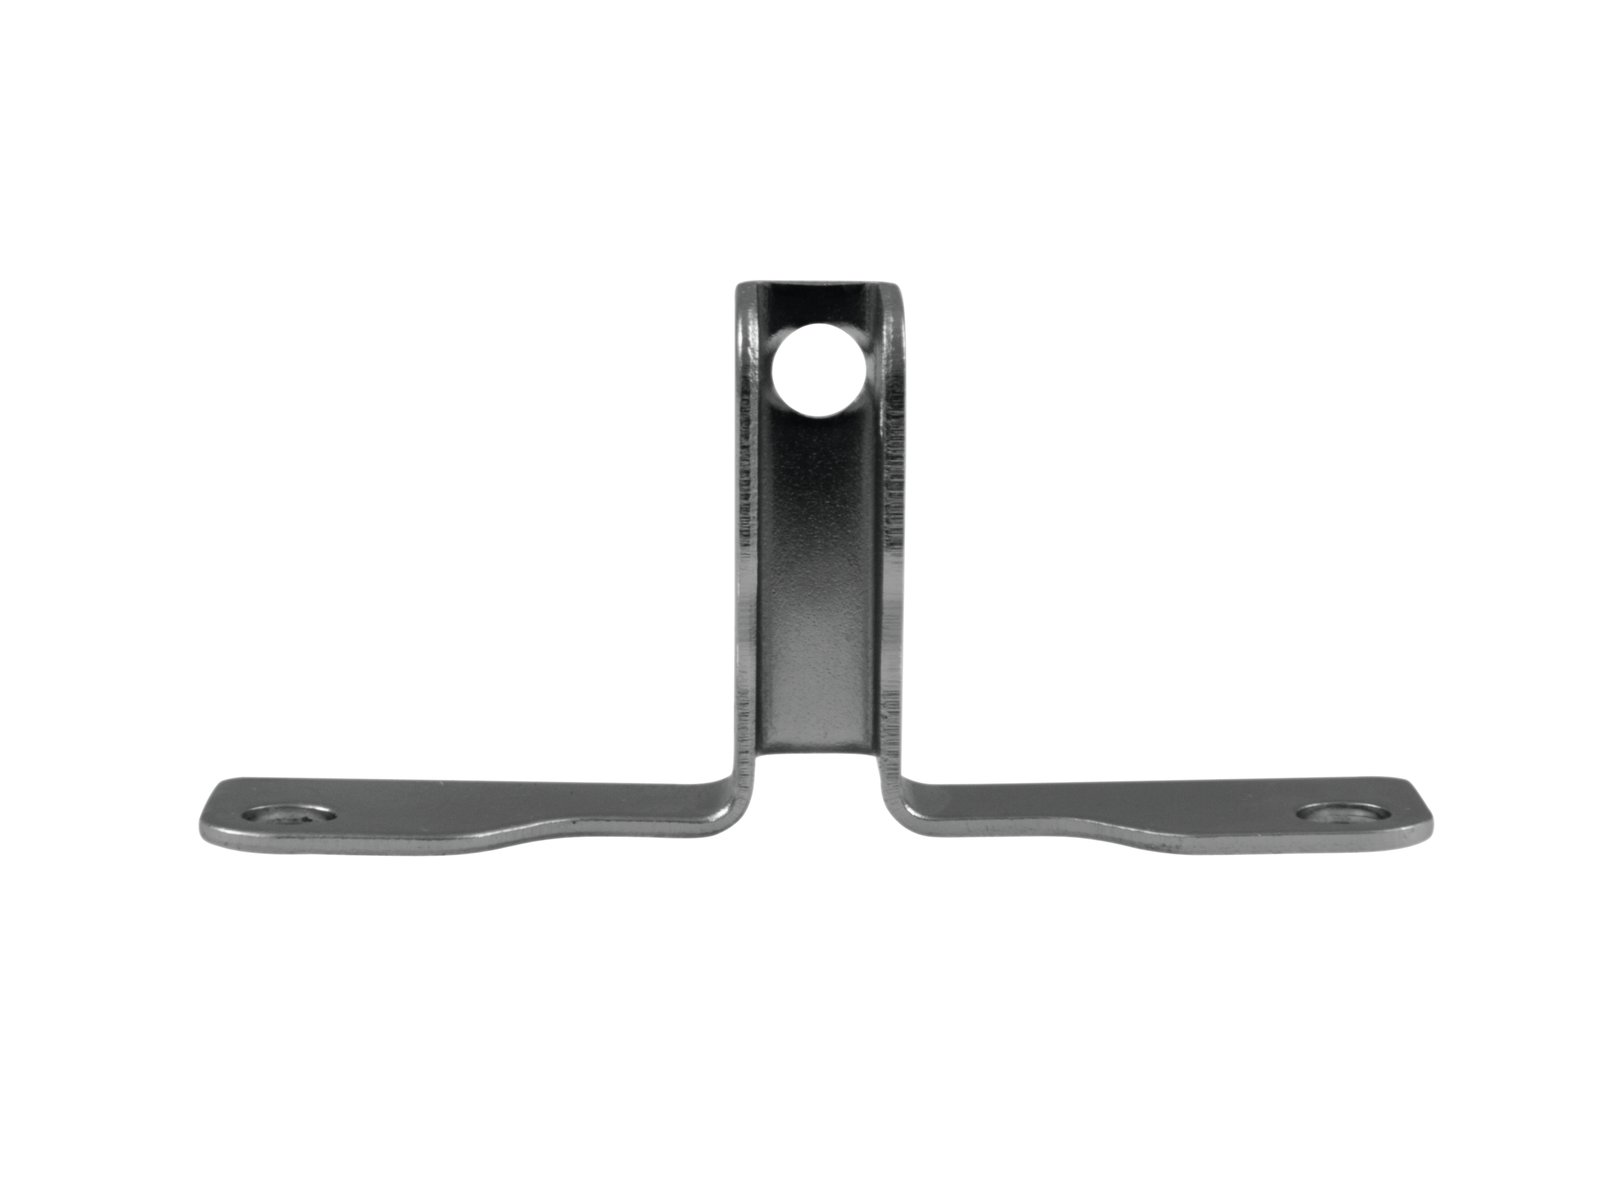 ACCESSORY Bracket for Dividing Walls 6,7mm